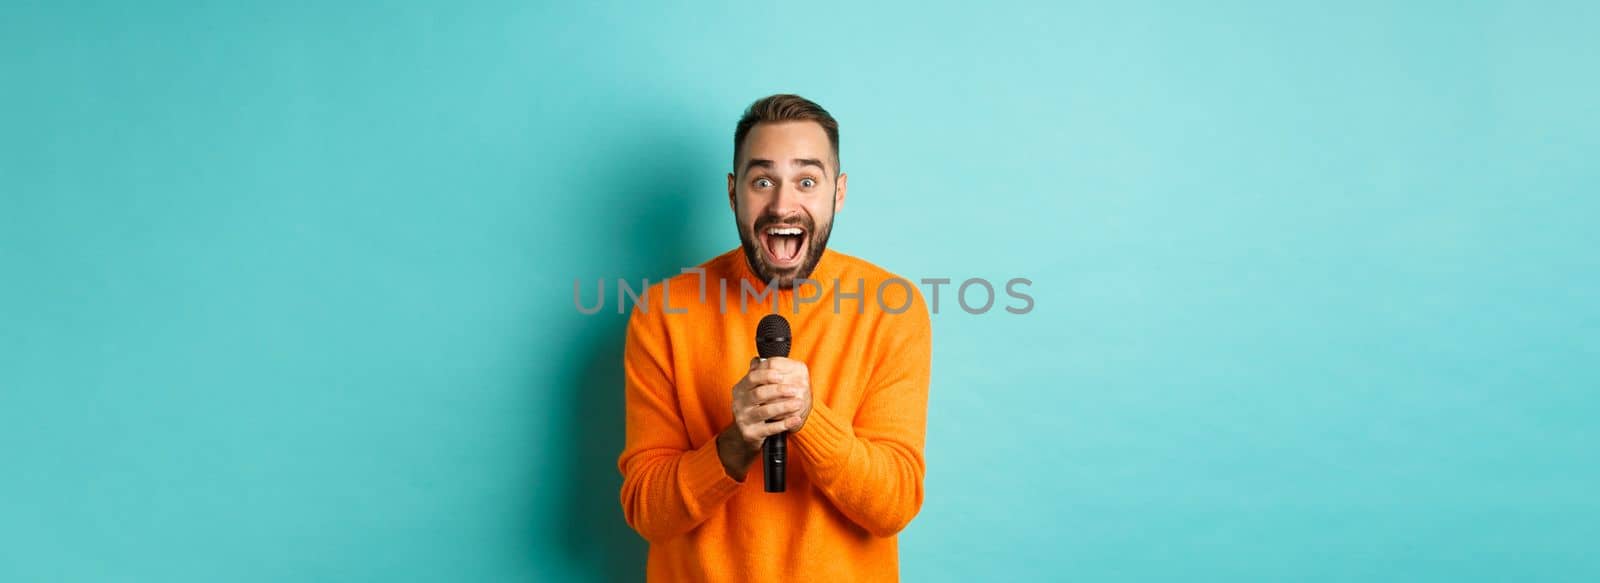 Handsome adult man perform song, singing into microphone, standing against turquoise background.